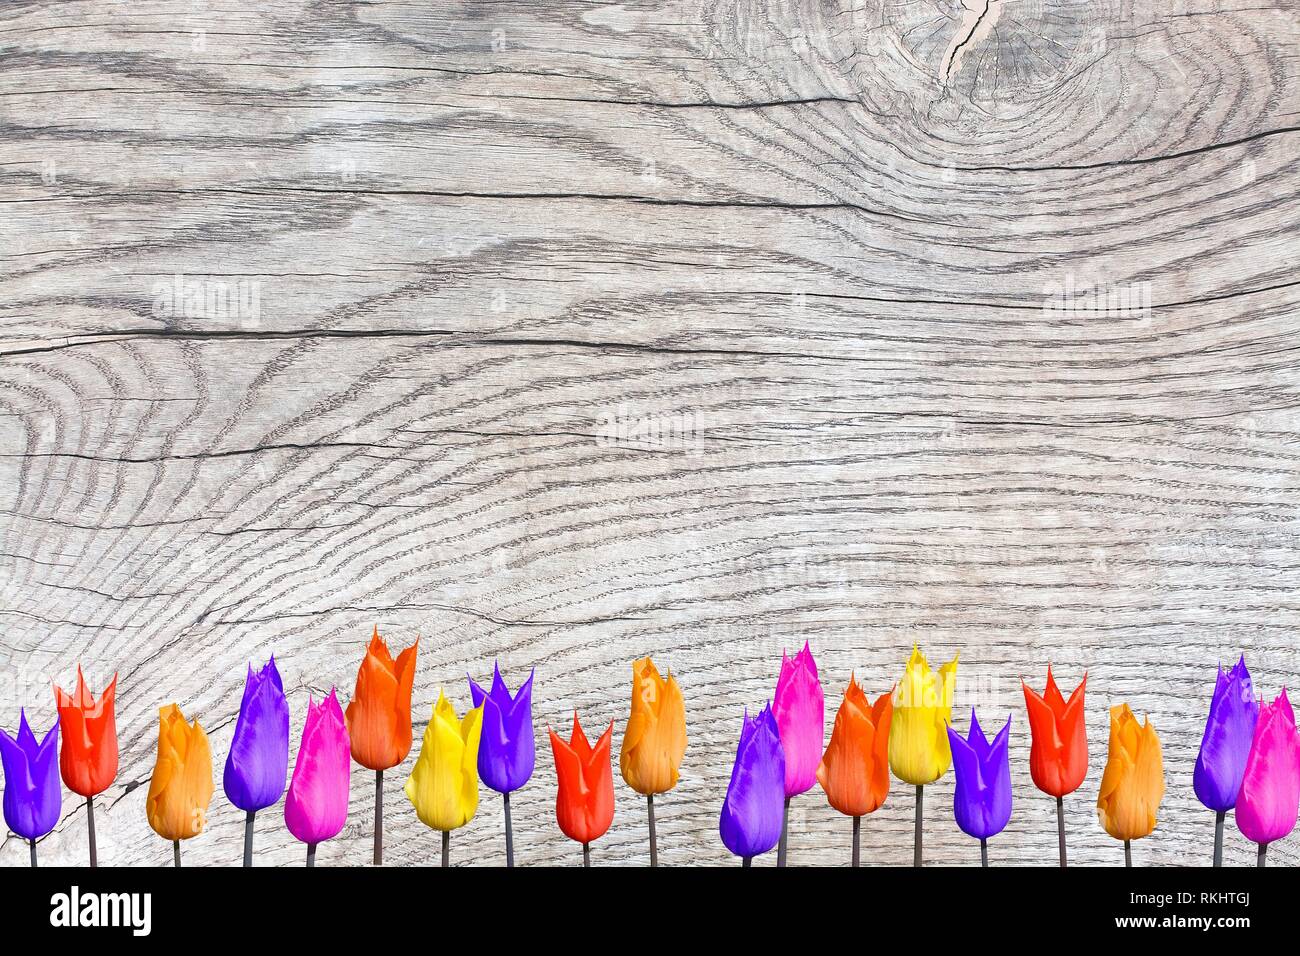 Tulips on wood surface with patina, organic texture background copy space. Stock Photo